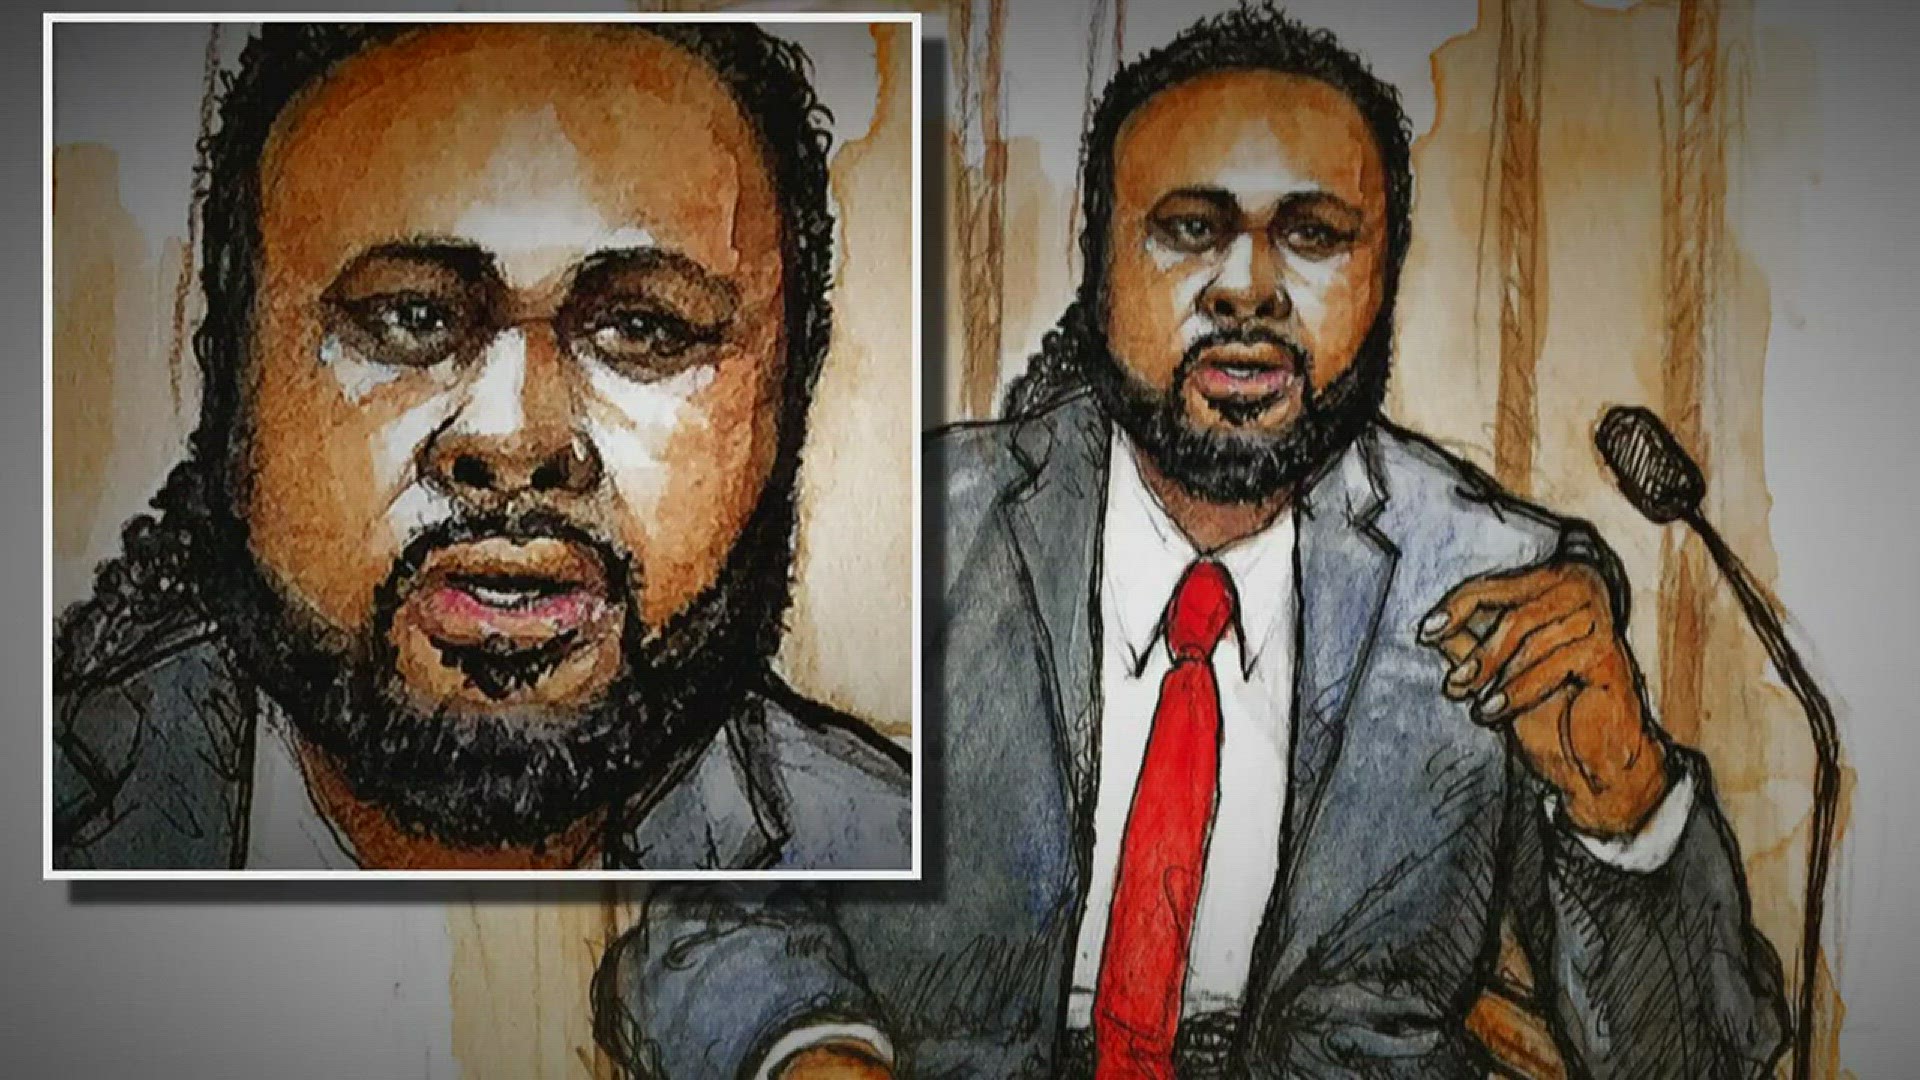 There was some strange testimony at the sentencing hearing for the man convicted of killing former Saints player Will Smith. Duke Carter reports.